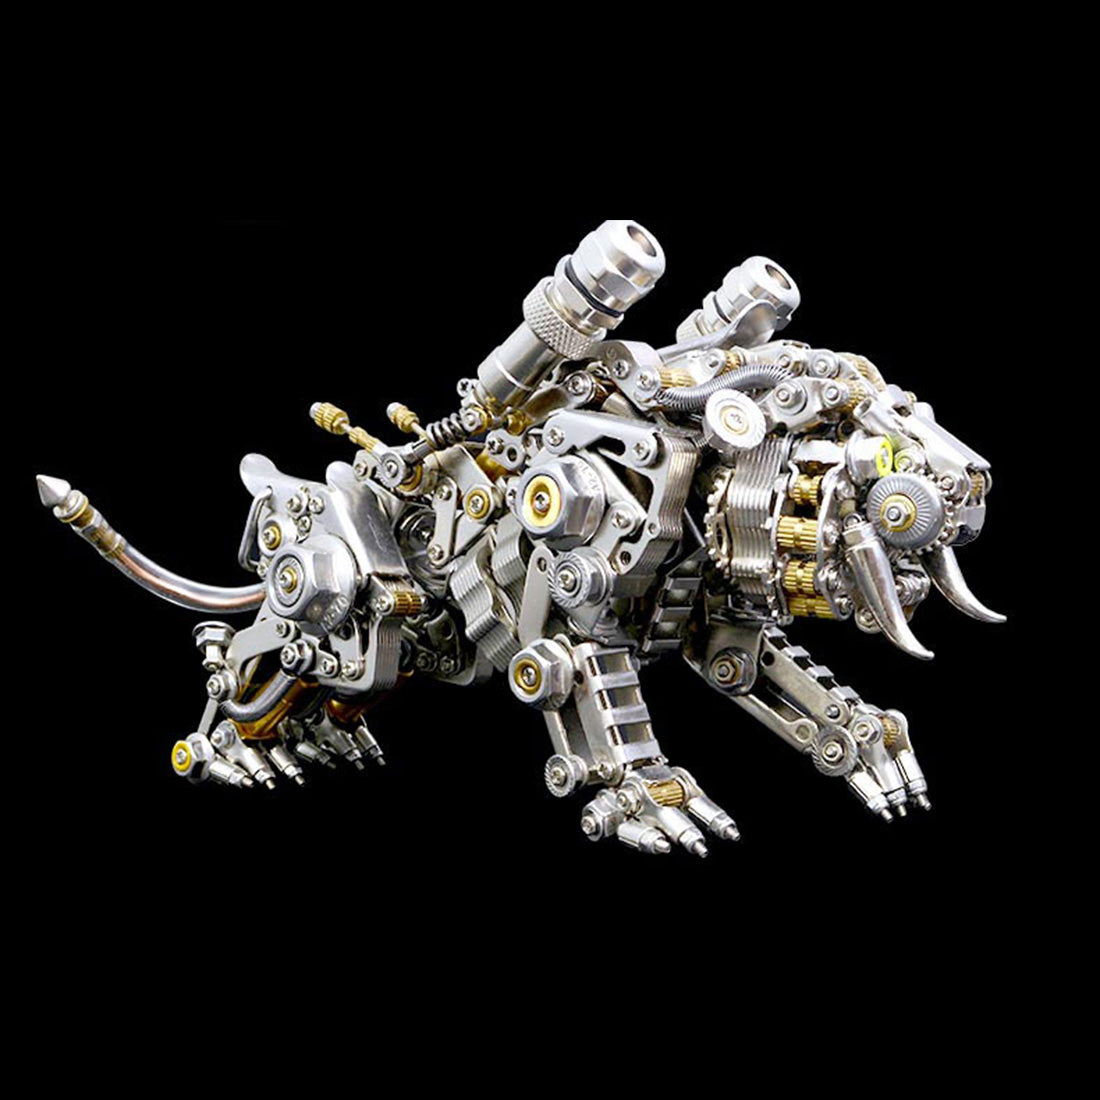 700PCS+ Colorful Bengal Tiger 3D Metal Model Assembly Building Kit for Adults - stirlingkit